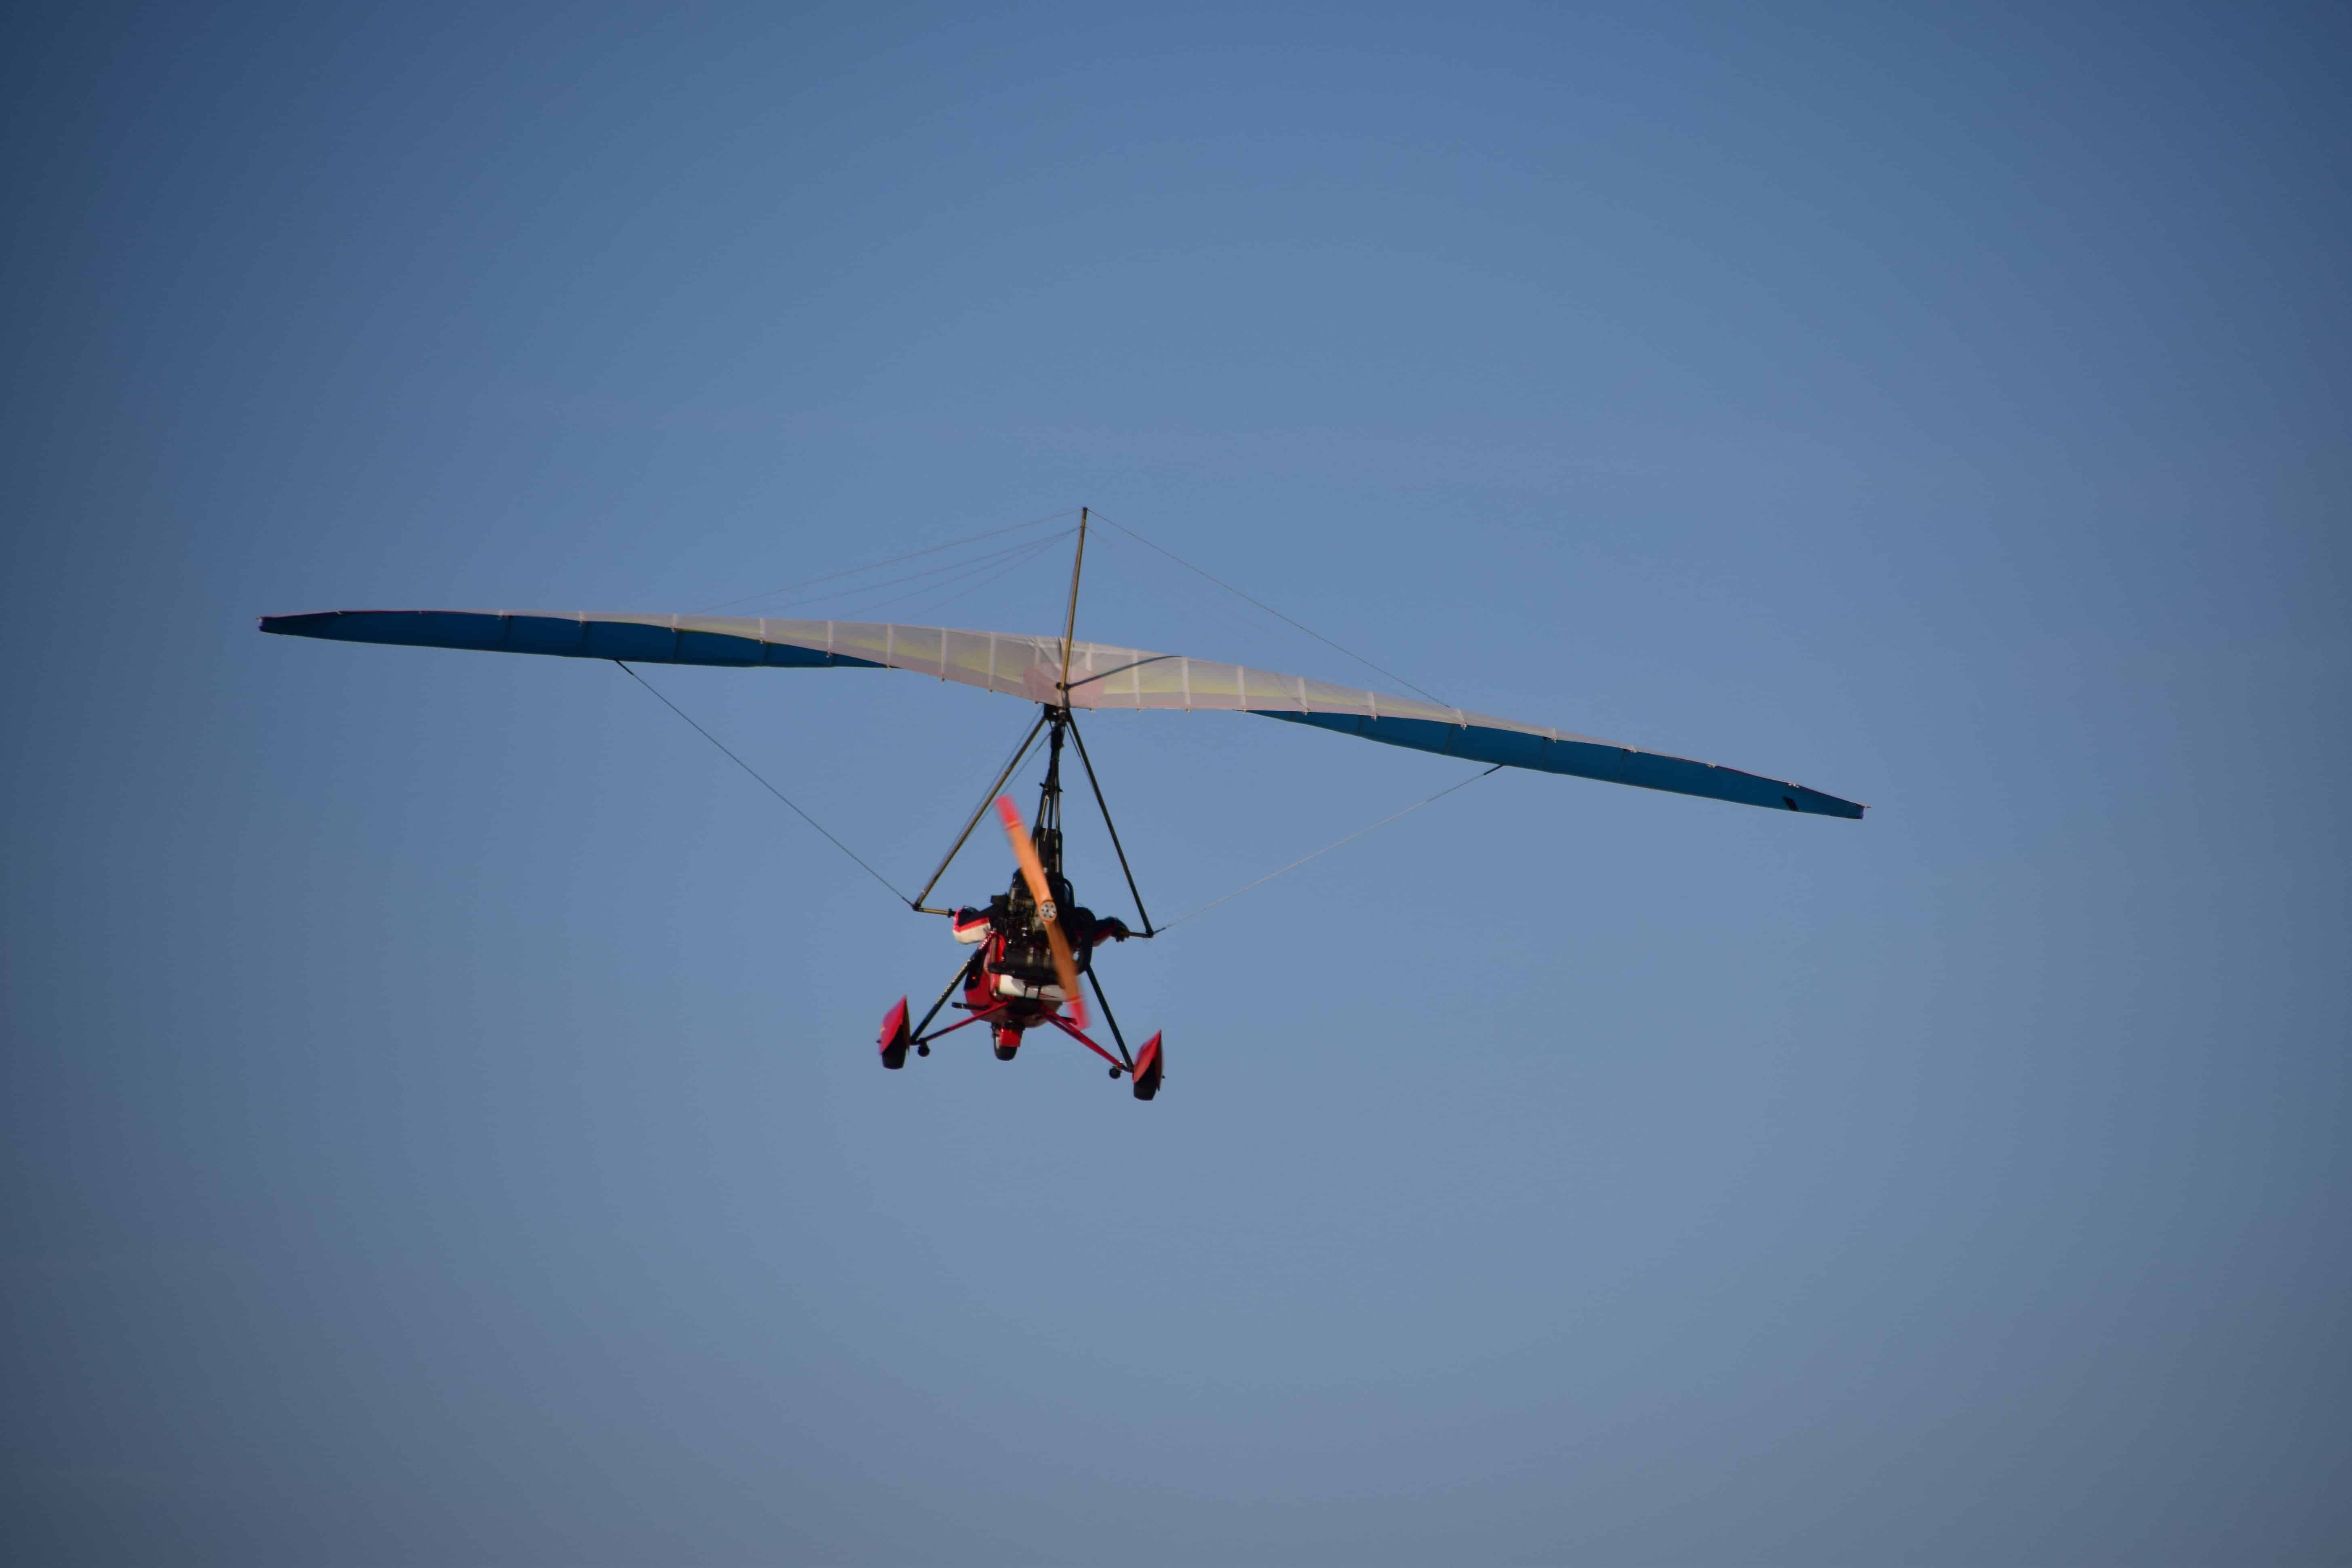 Free Picture Hang Glider Sky Aviation Flying Sky Air Wing Vehicle Transport